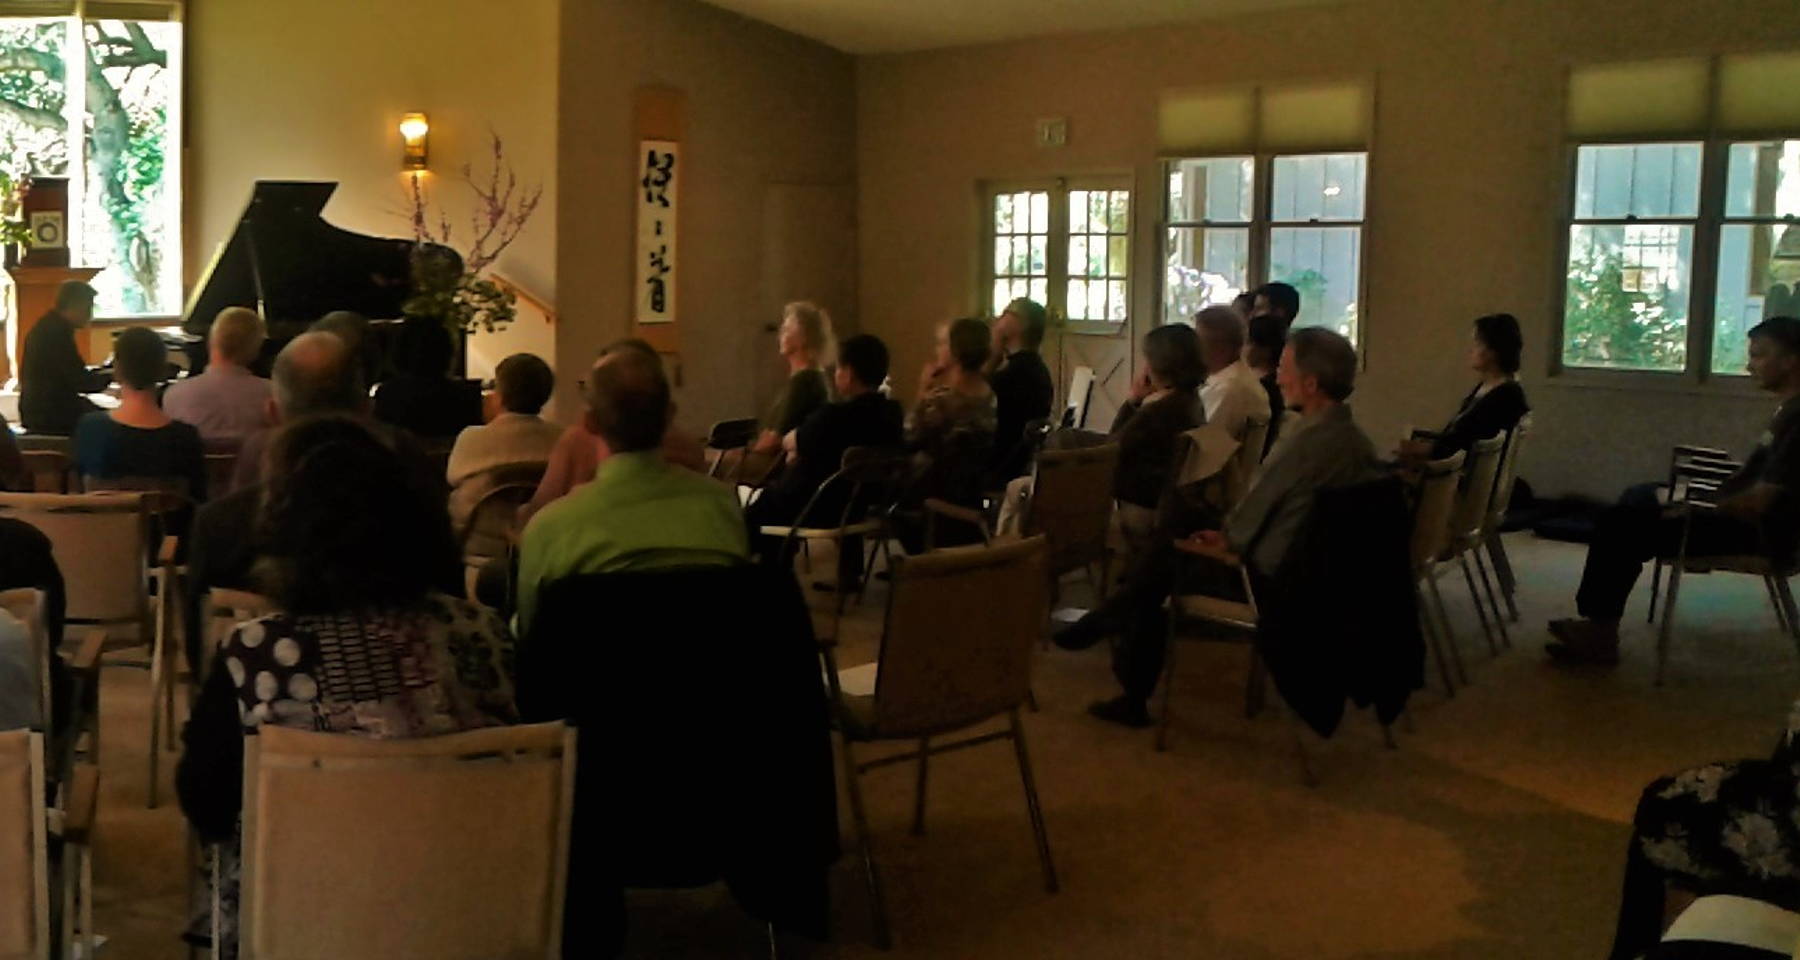 Music in the Zendo - Pianist Peter Gach performs Bach, Chopin and Krause